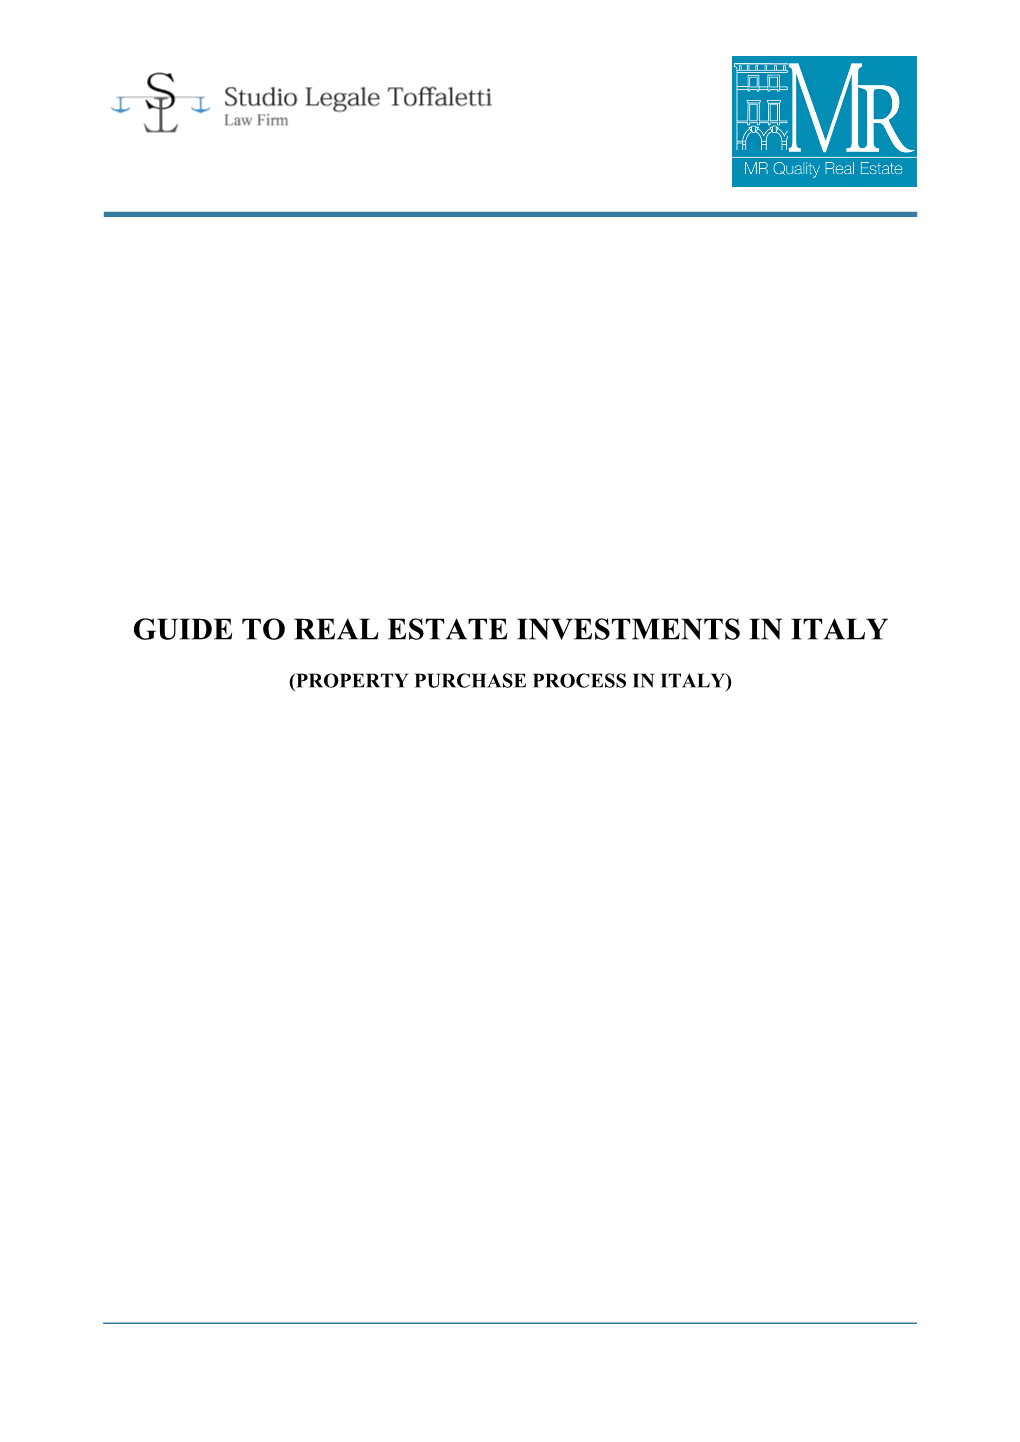 Guide to Property Purchase Process in Italy